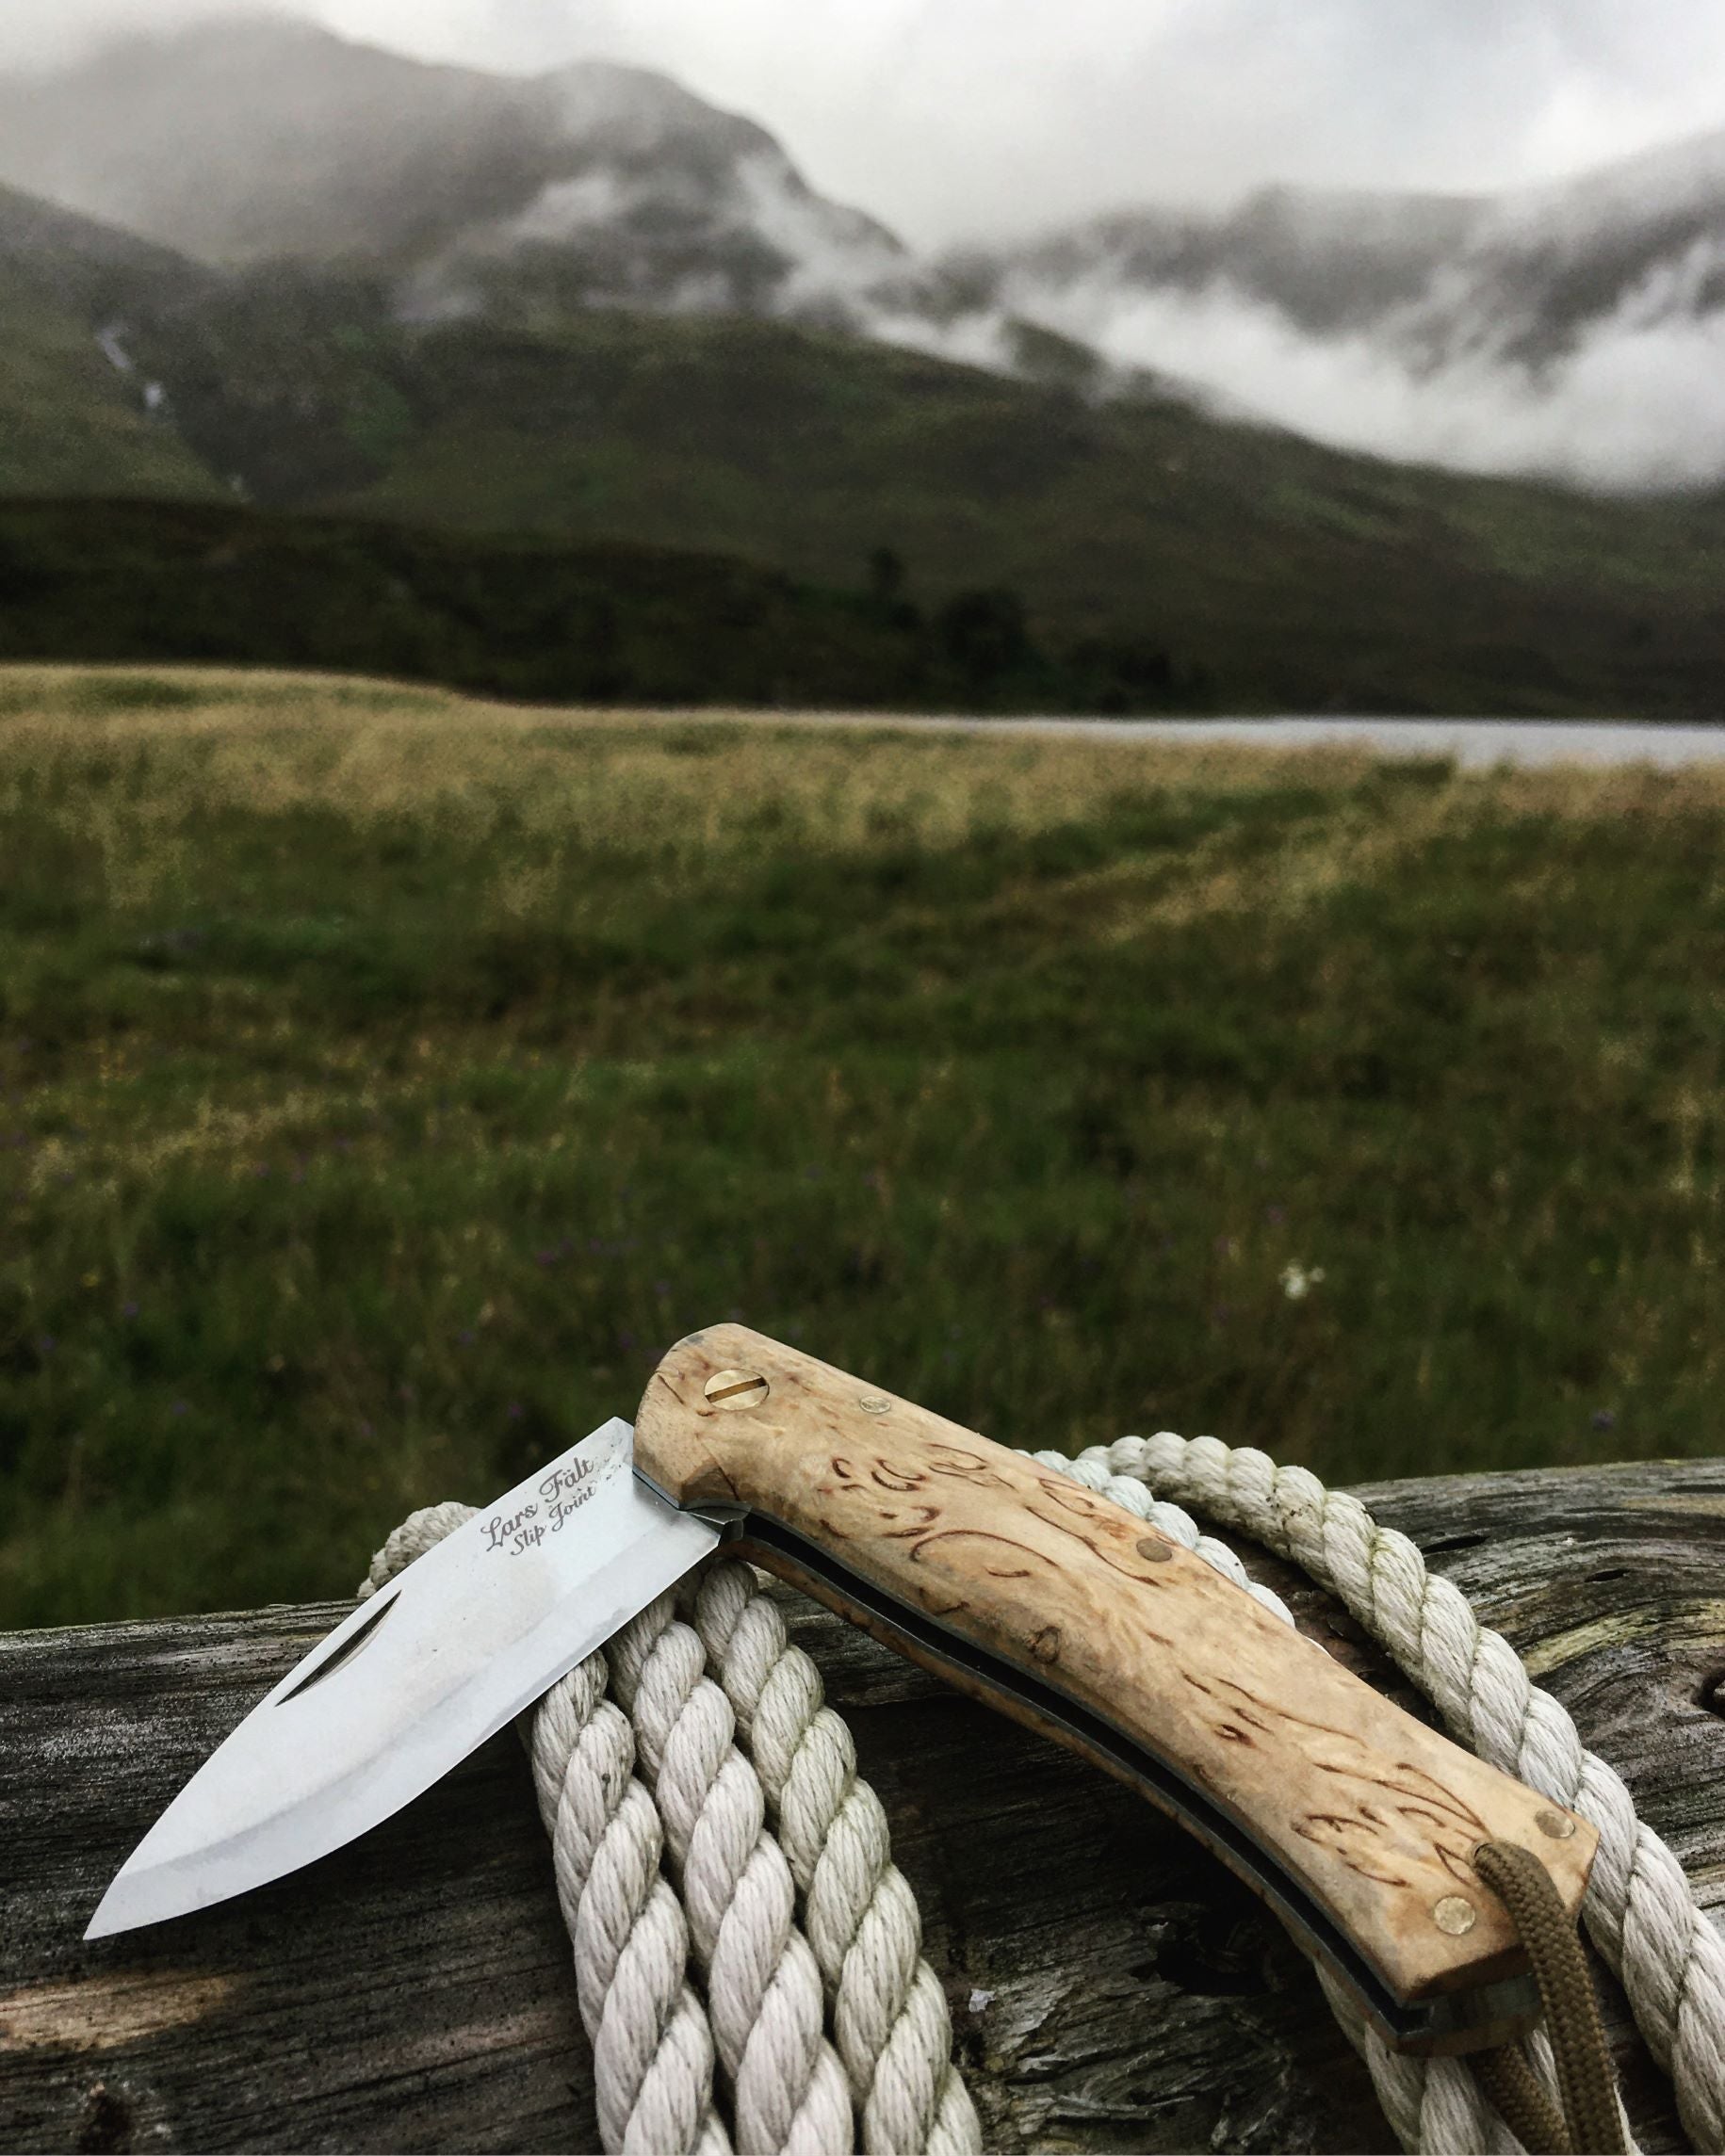 Non-locking Slip Joint pocket knife, made by Casstrom Sweden. Knife is laid on a log in the foreground and has hills in the background